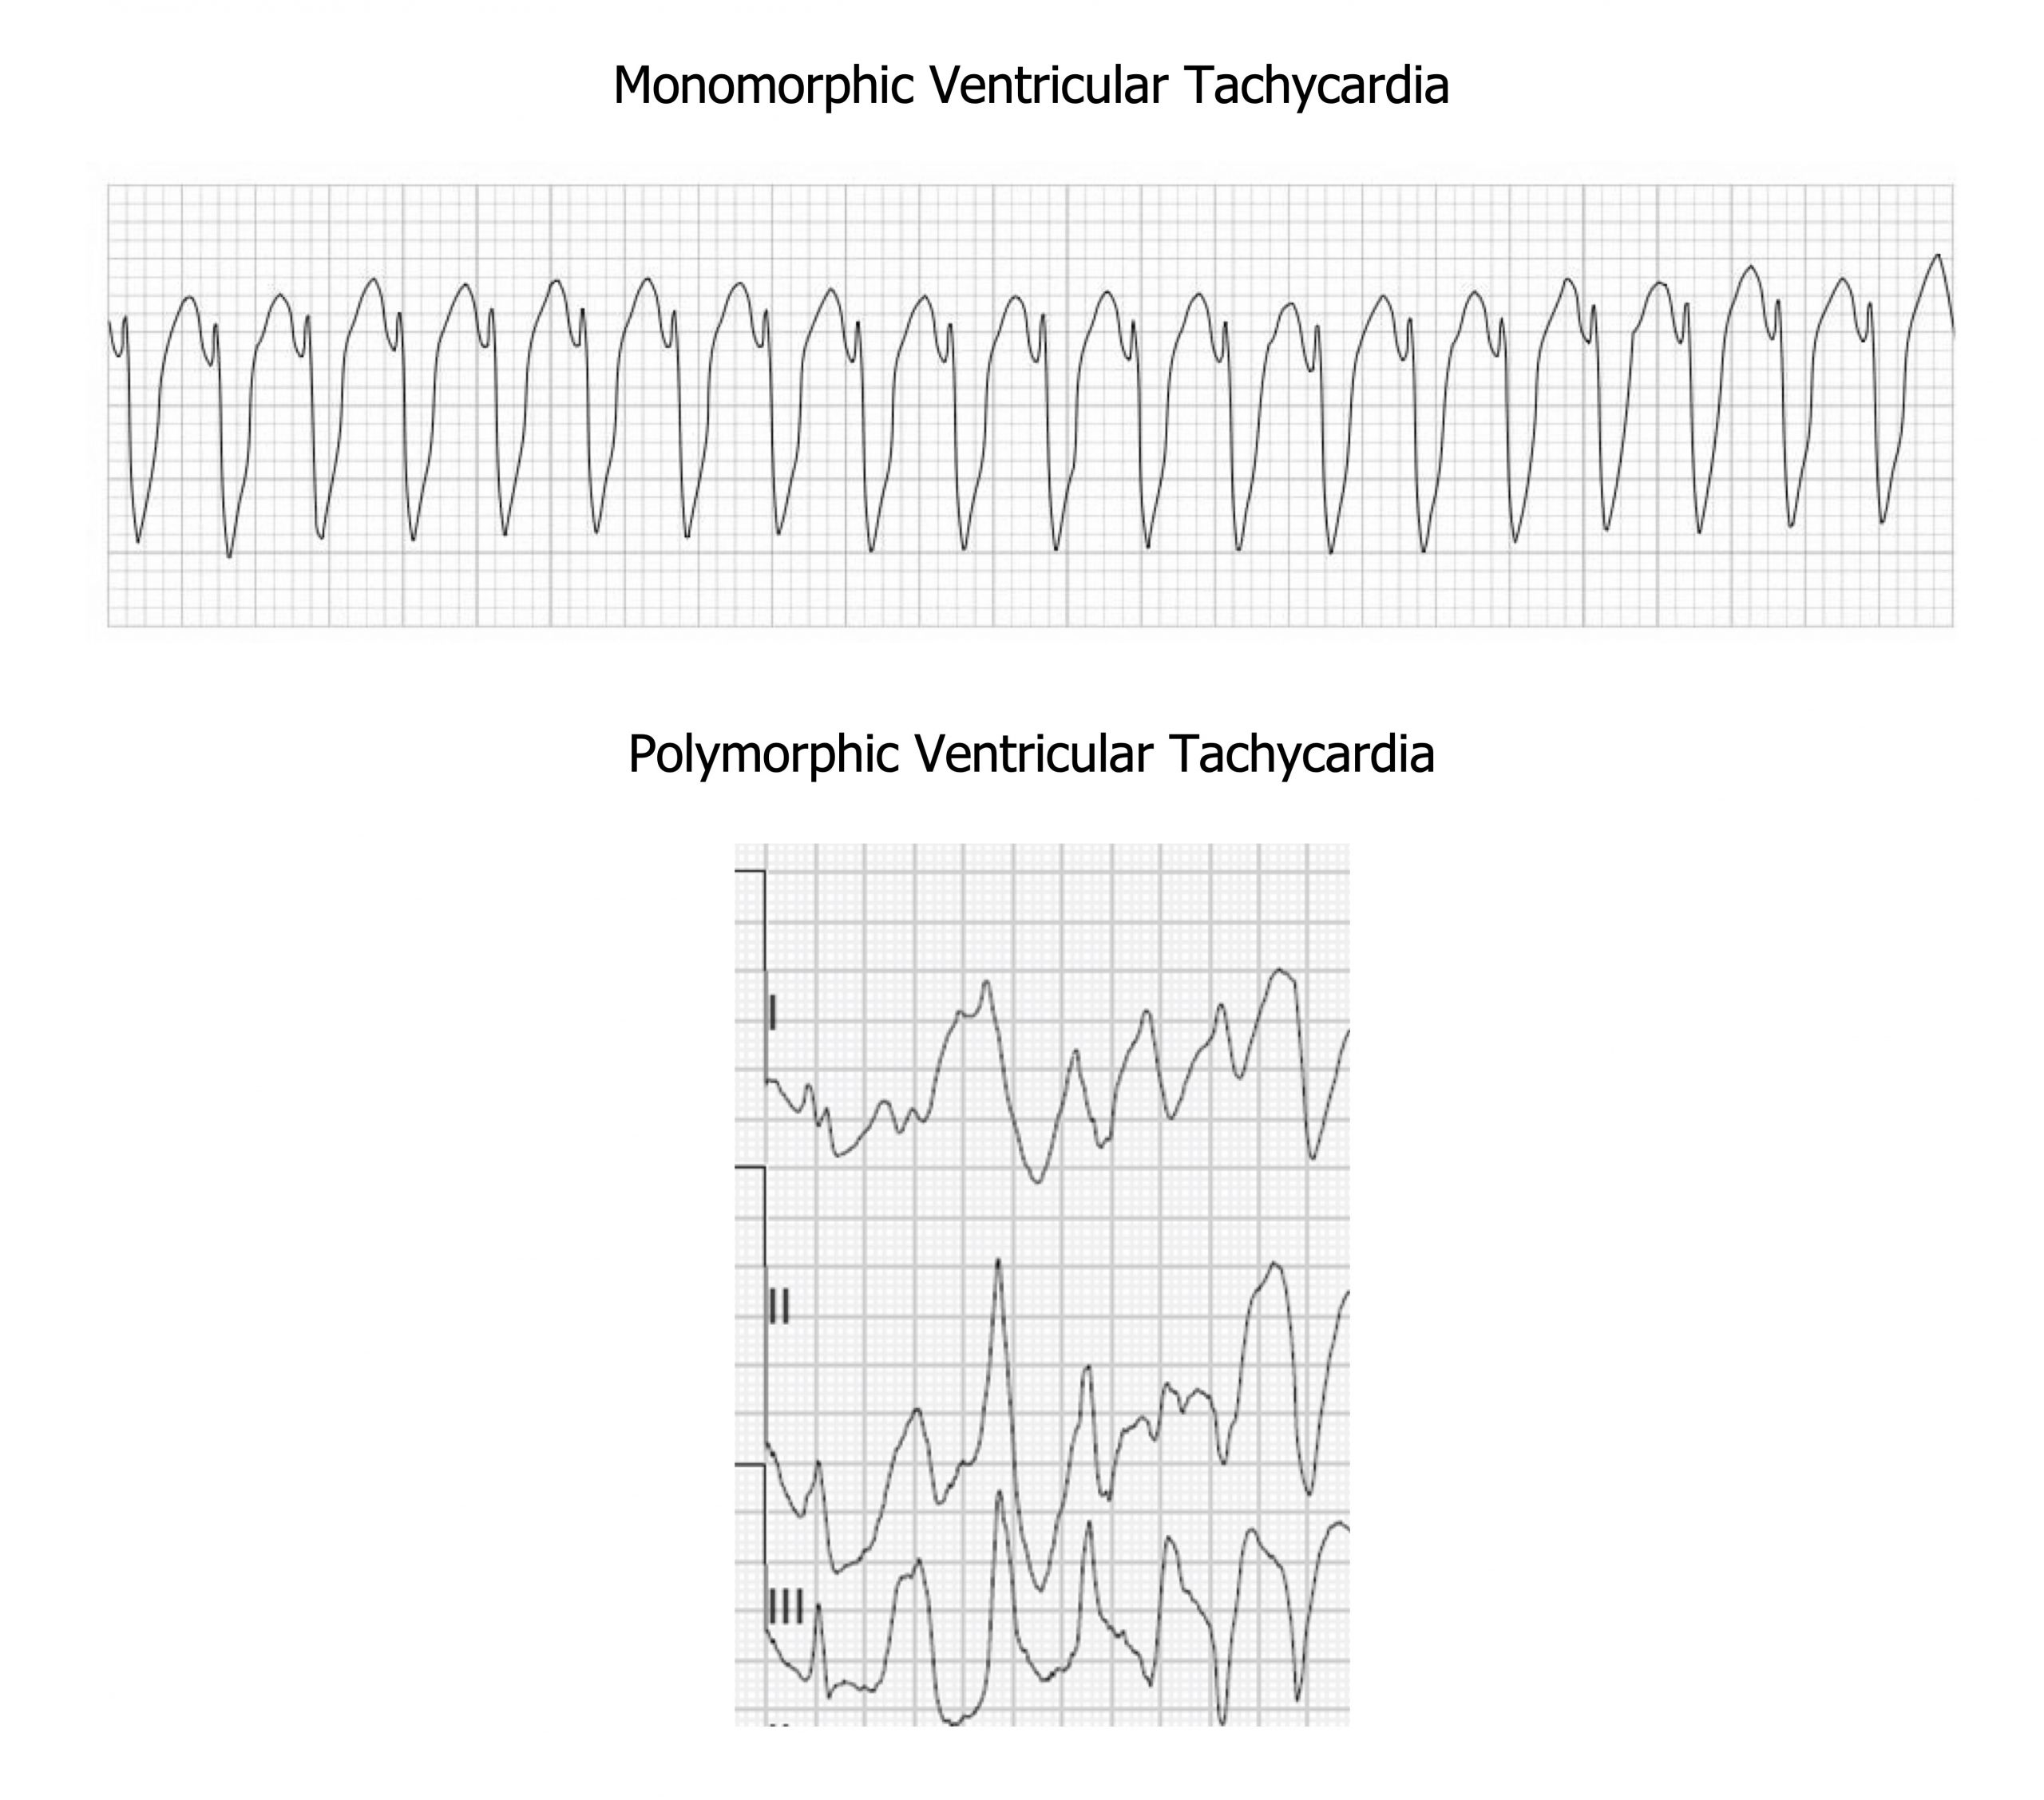 Image shows large, broad complexes with no resemblance to a normal ECG. The complexes are uniform in shape each with a dome peak.